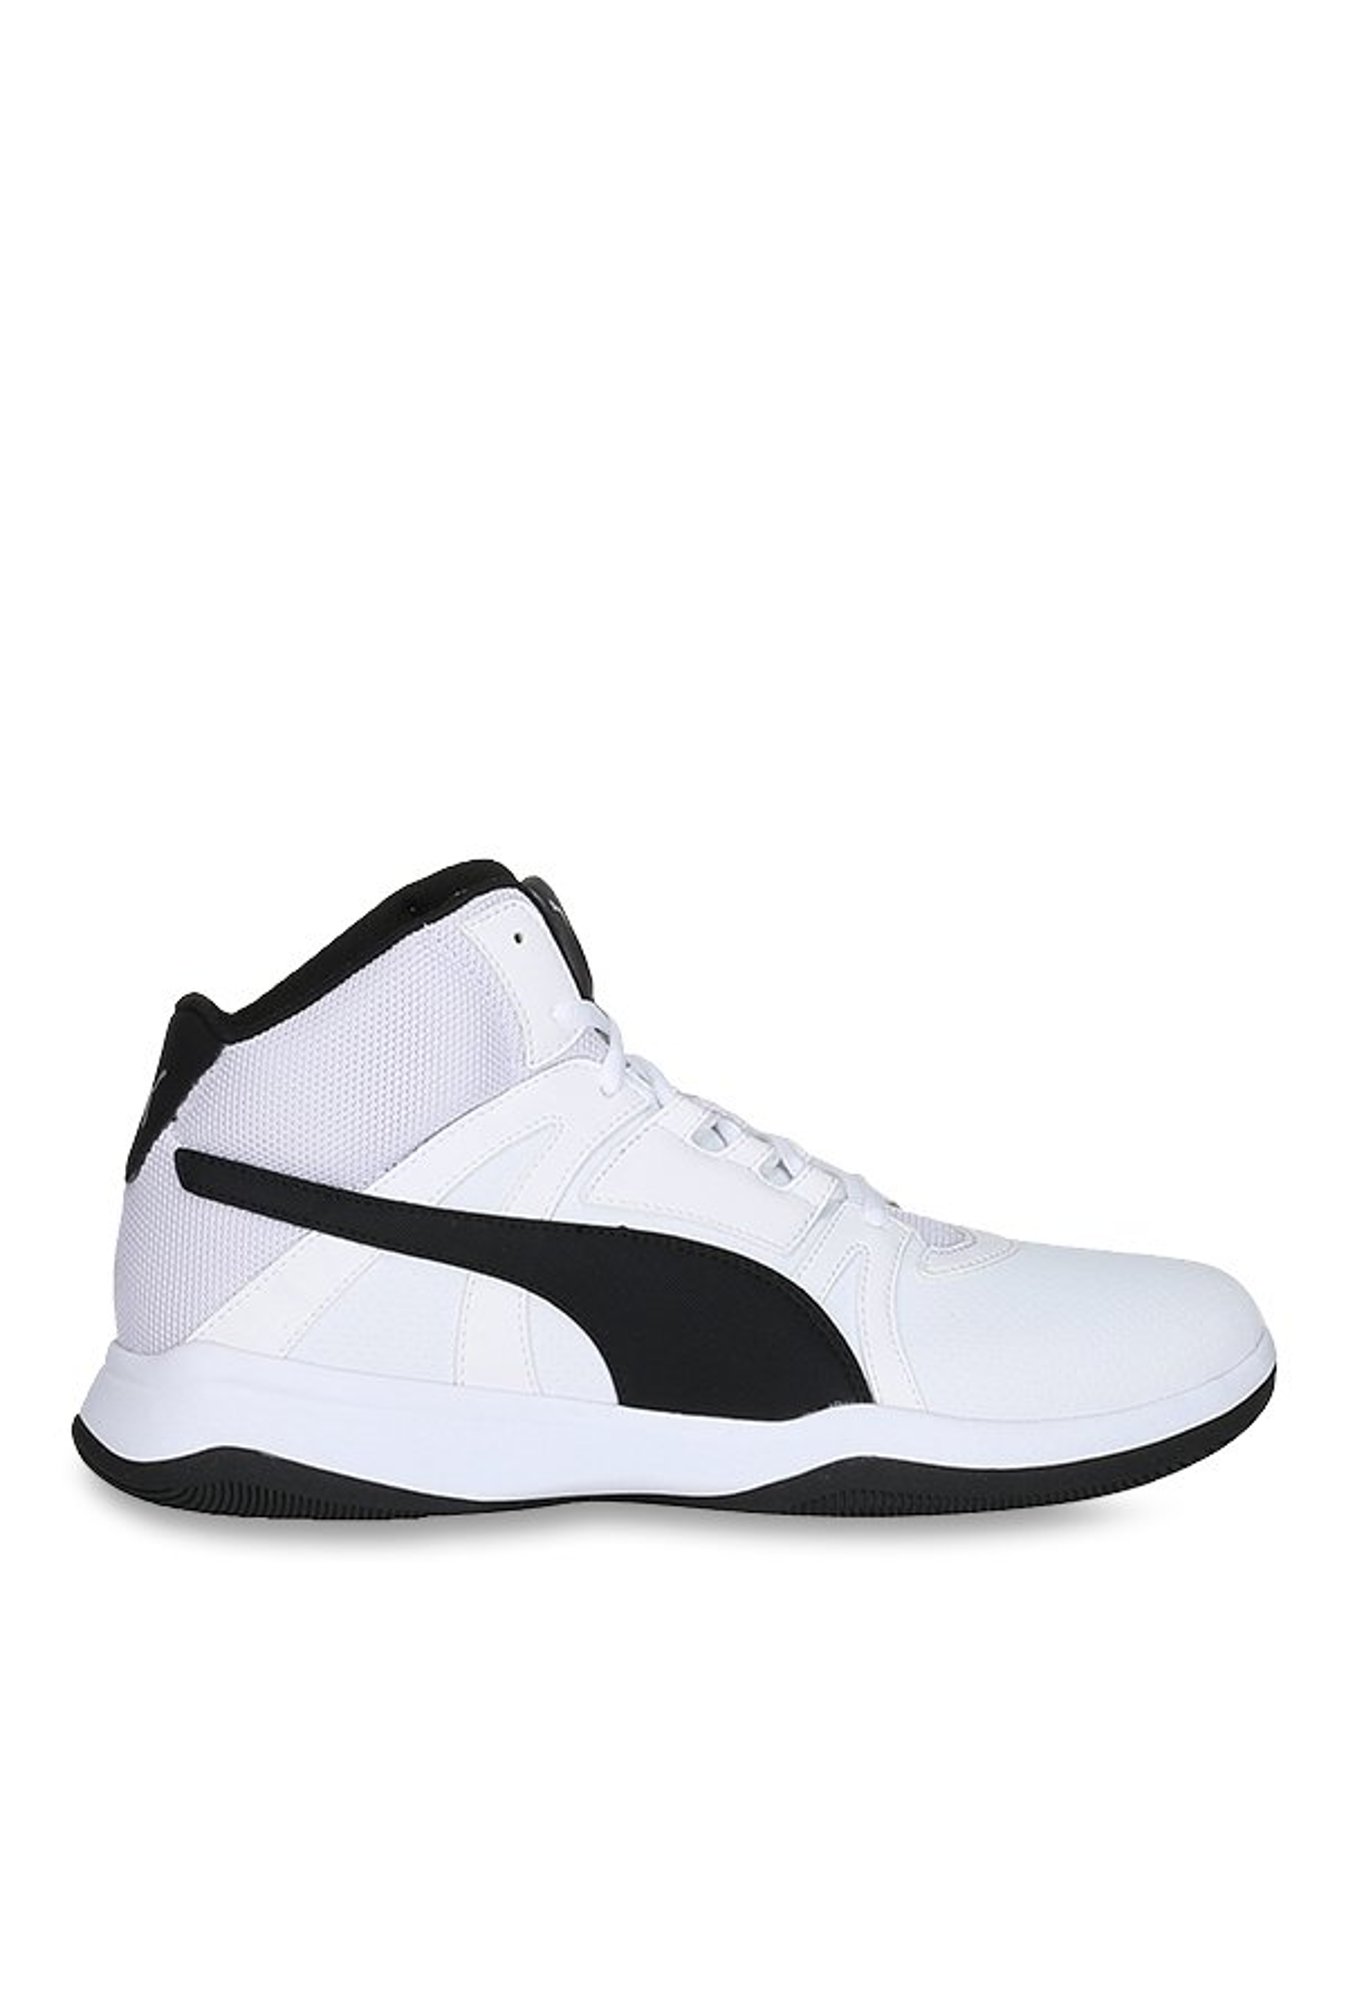 Brand New PUMA rebound street V2 L / PUMA high top sneakers /PUMA white  sneakers, Women's Fashion, Footwear, Sneakers on Carousell